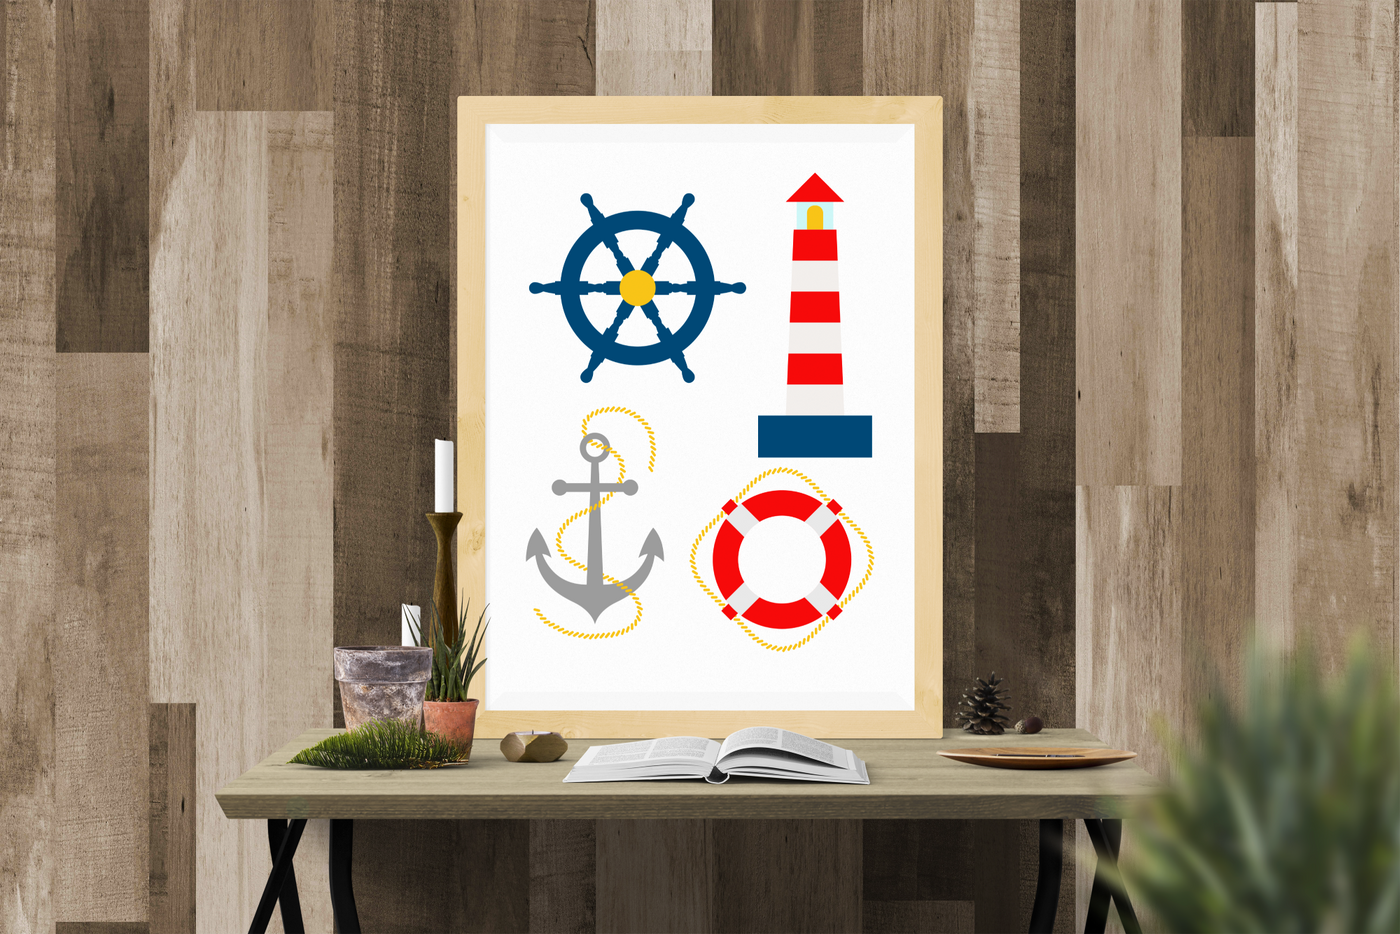 Nautical themed SVG designs. There is an anchor, a life preserver, a lighthouse, and a ship's wheel.